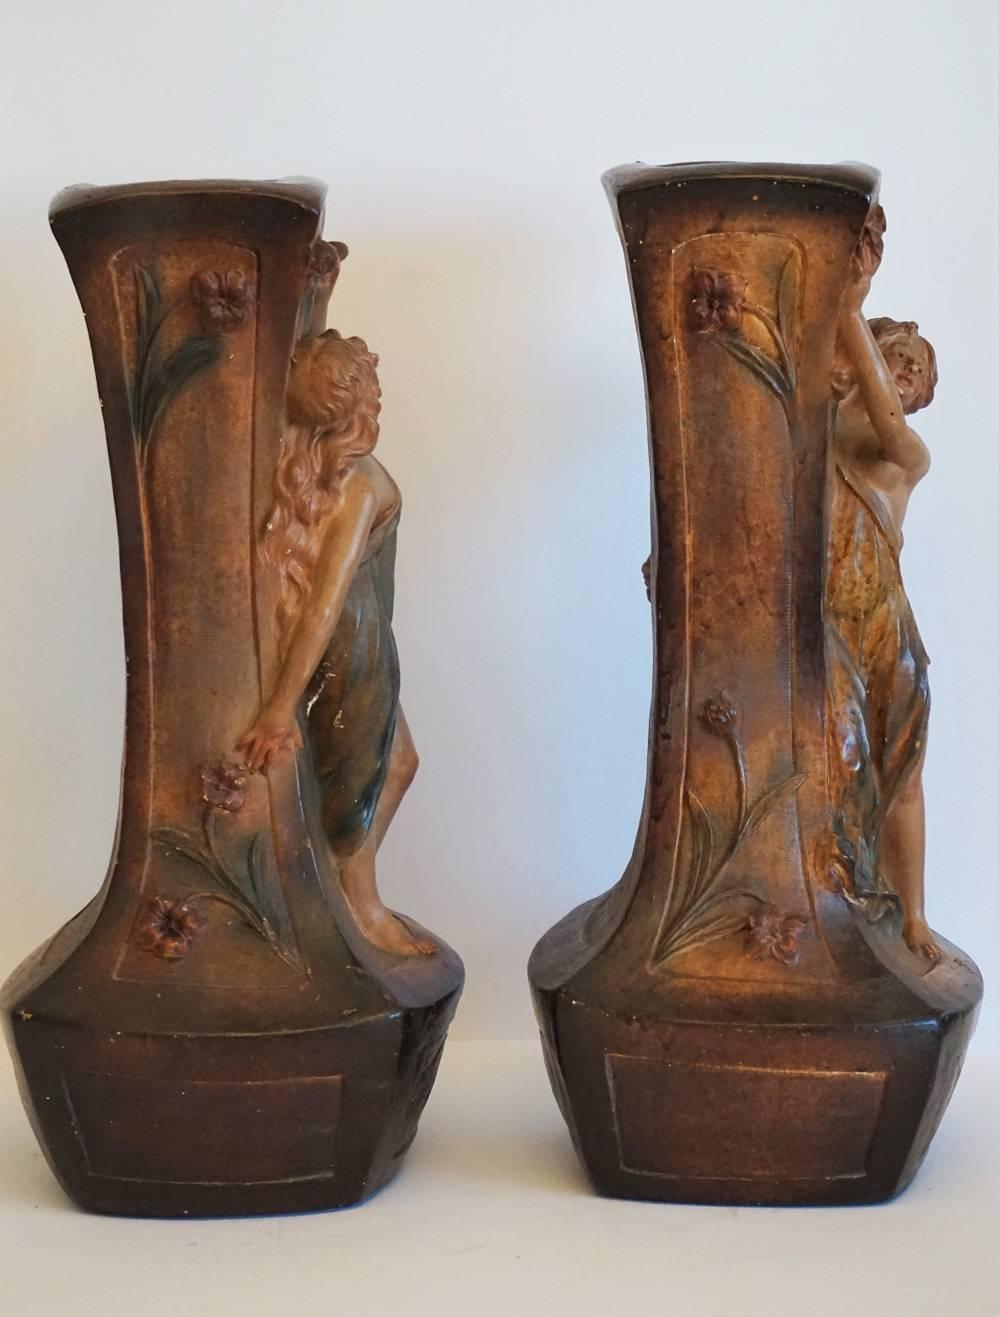 A stunning French Art Nouveau pair of large vases with female figures of the era, signed by the Parisian Sculptor F. Citti, Paris, 1900-1910

Measures:
Height 19 in (48 cm)
Width 7.25 in (18 cm)
Depth 7.25 in (18 cm).

The entire vases are in very